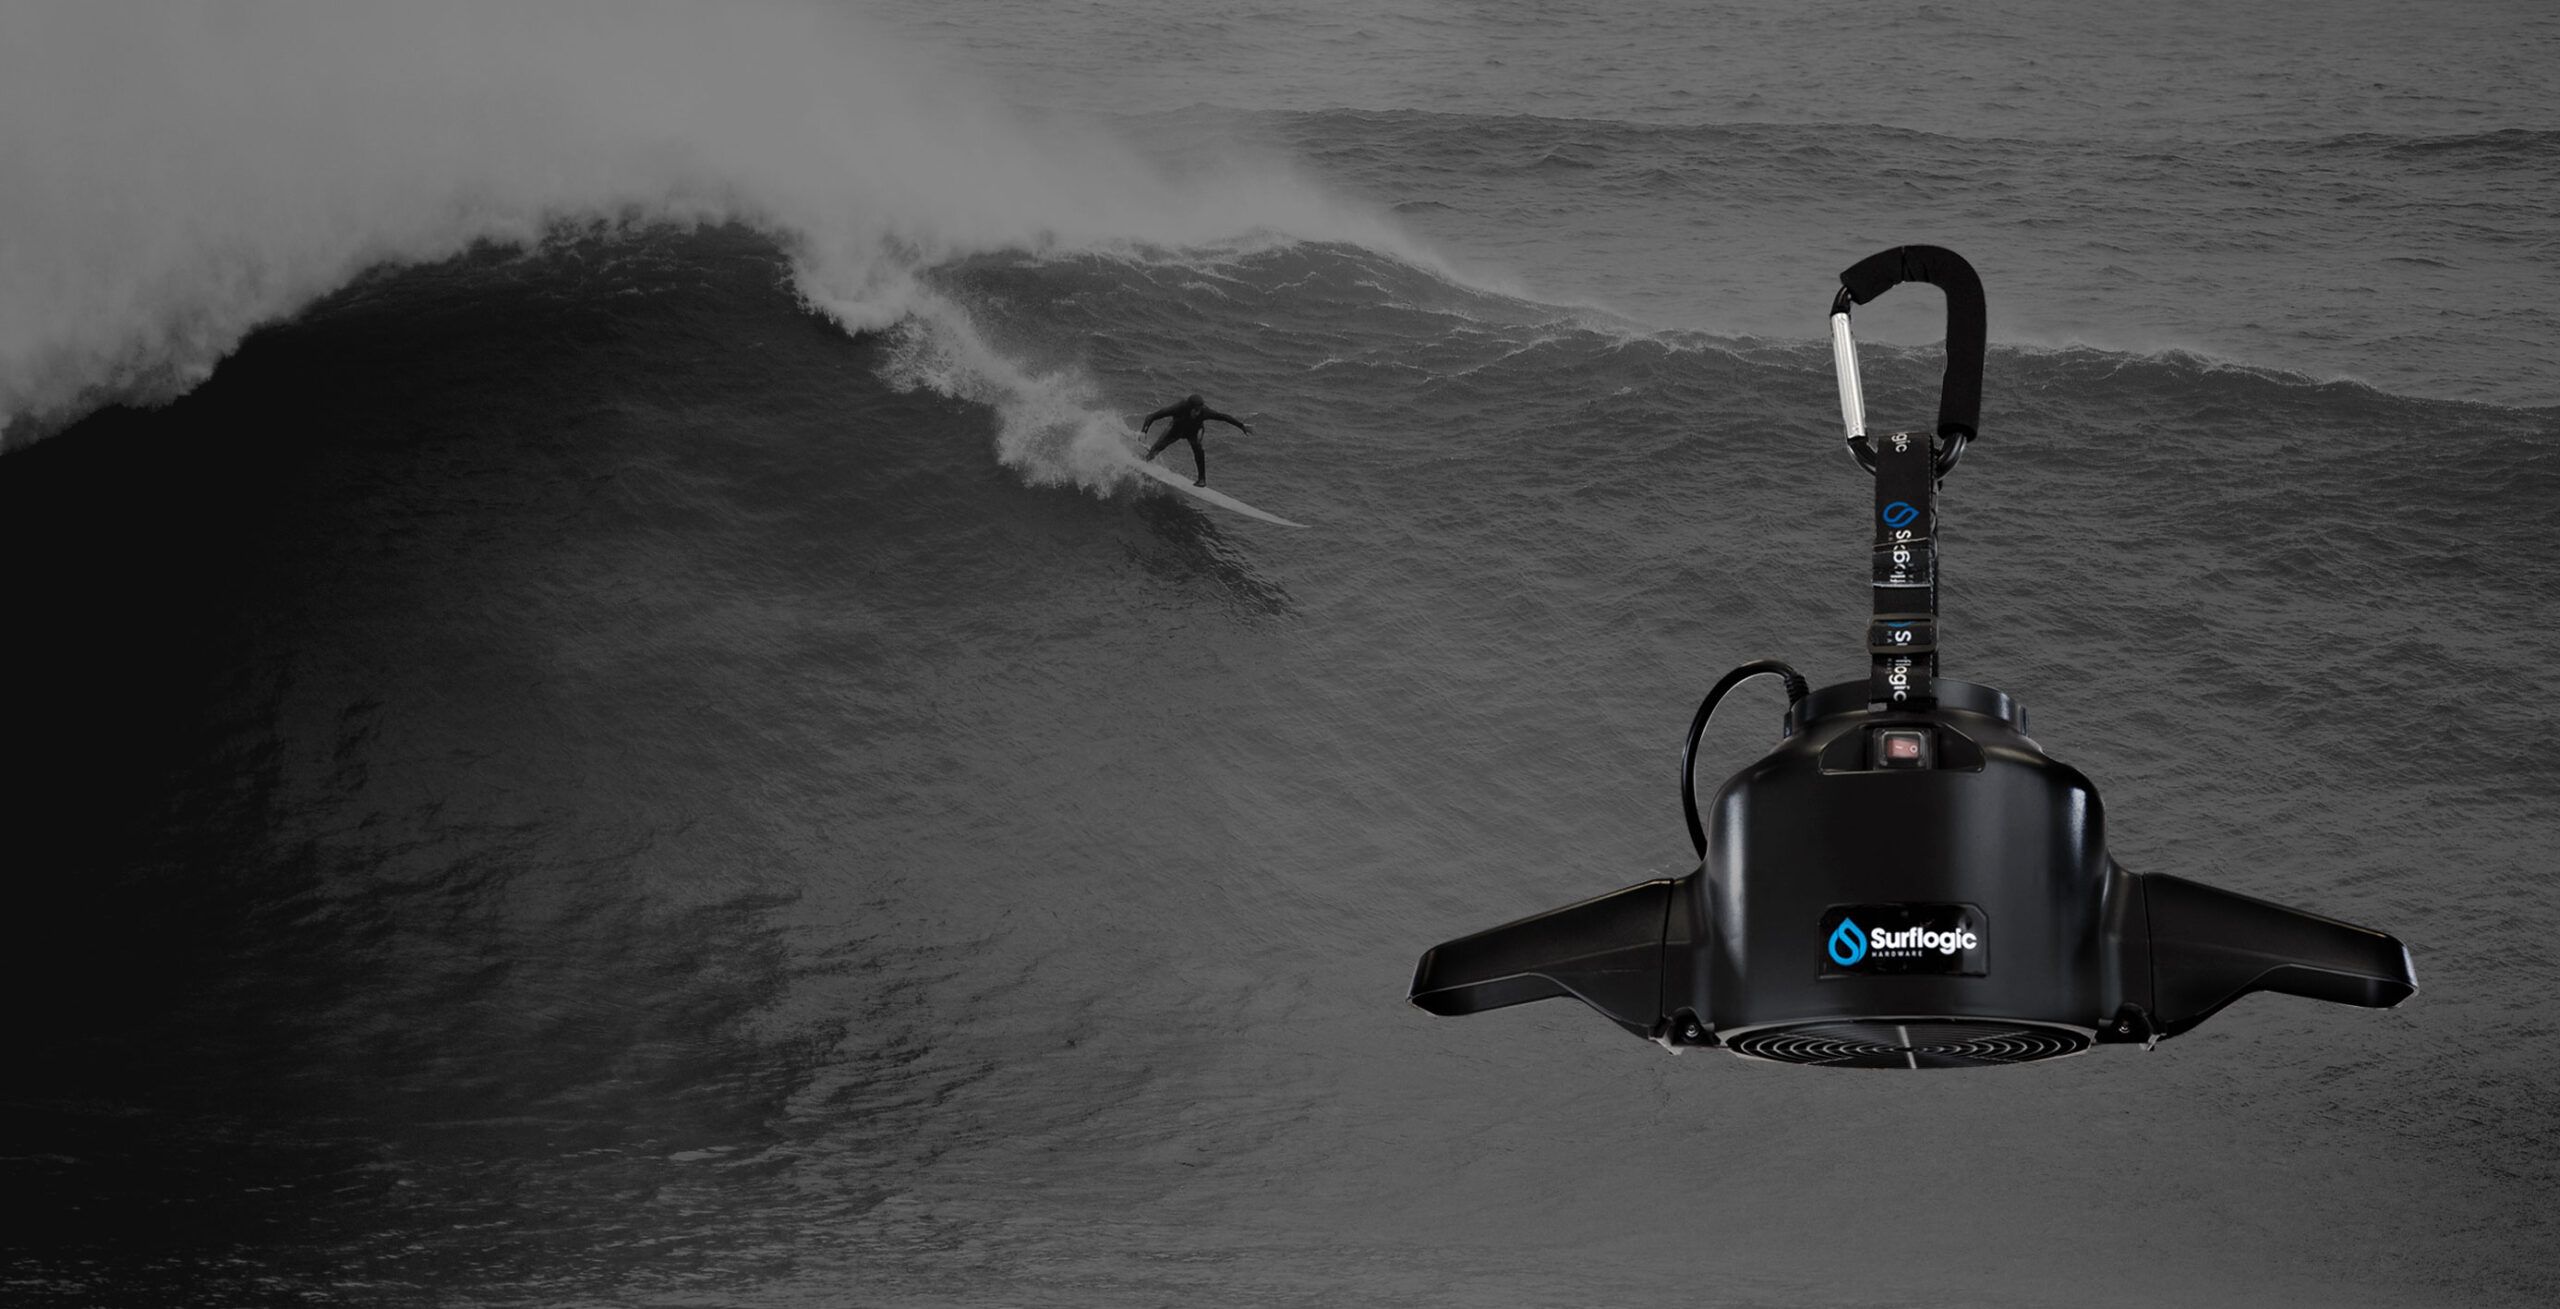 Surflogic - Innovation, security, quality and passion - We Surf